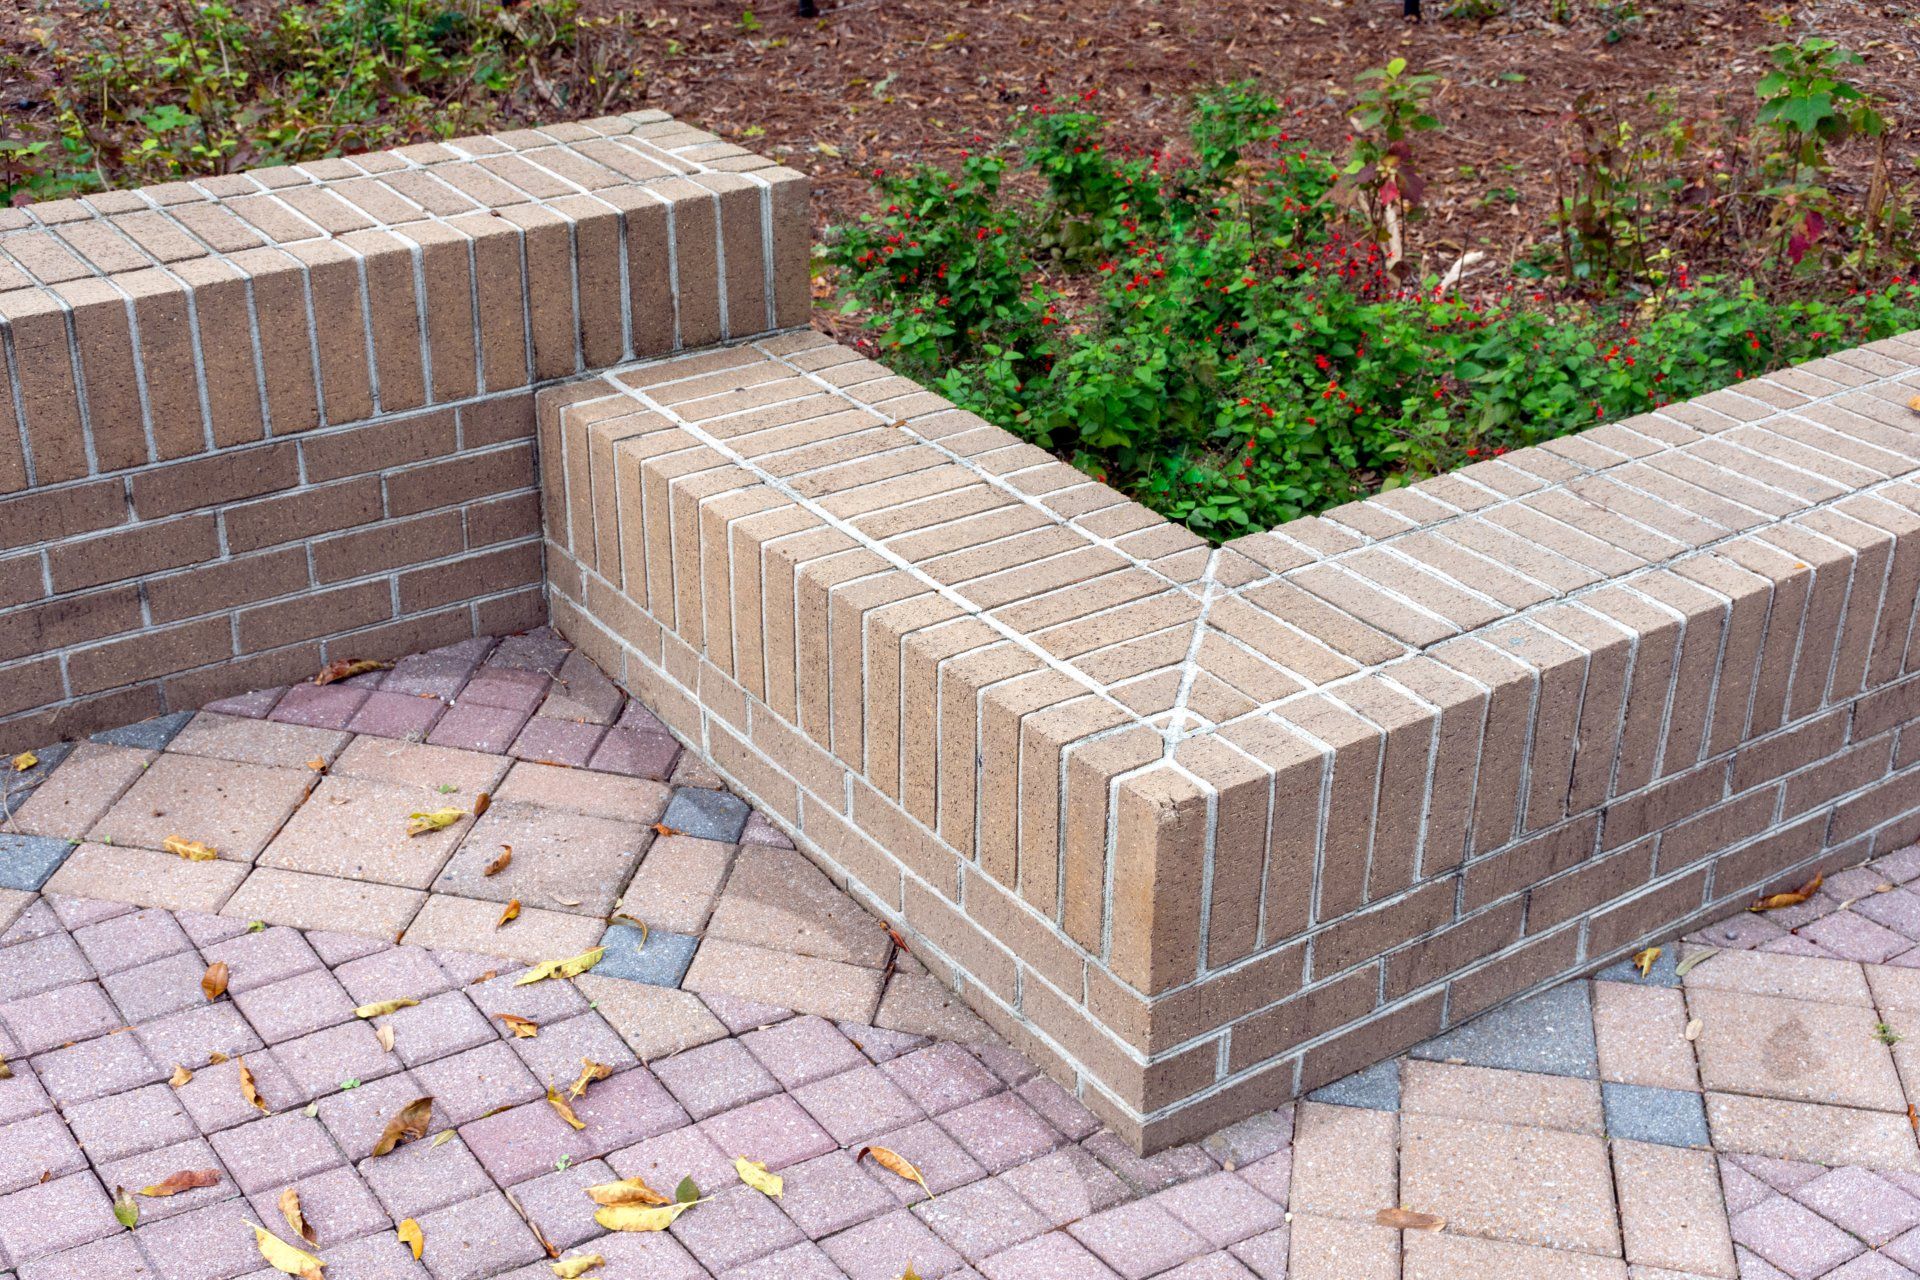 Beautiful design and high quality materials create a retaining wall which doubles as extra seating in the garden.